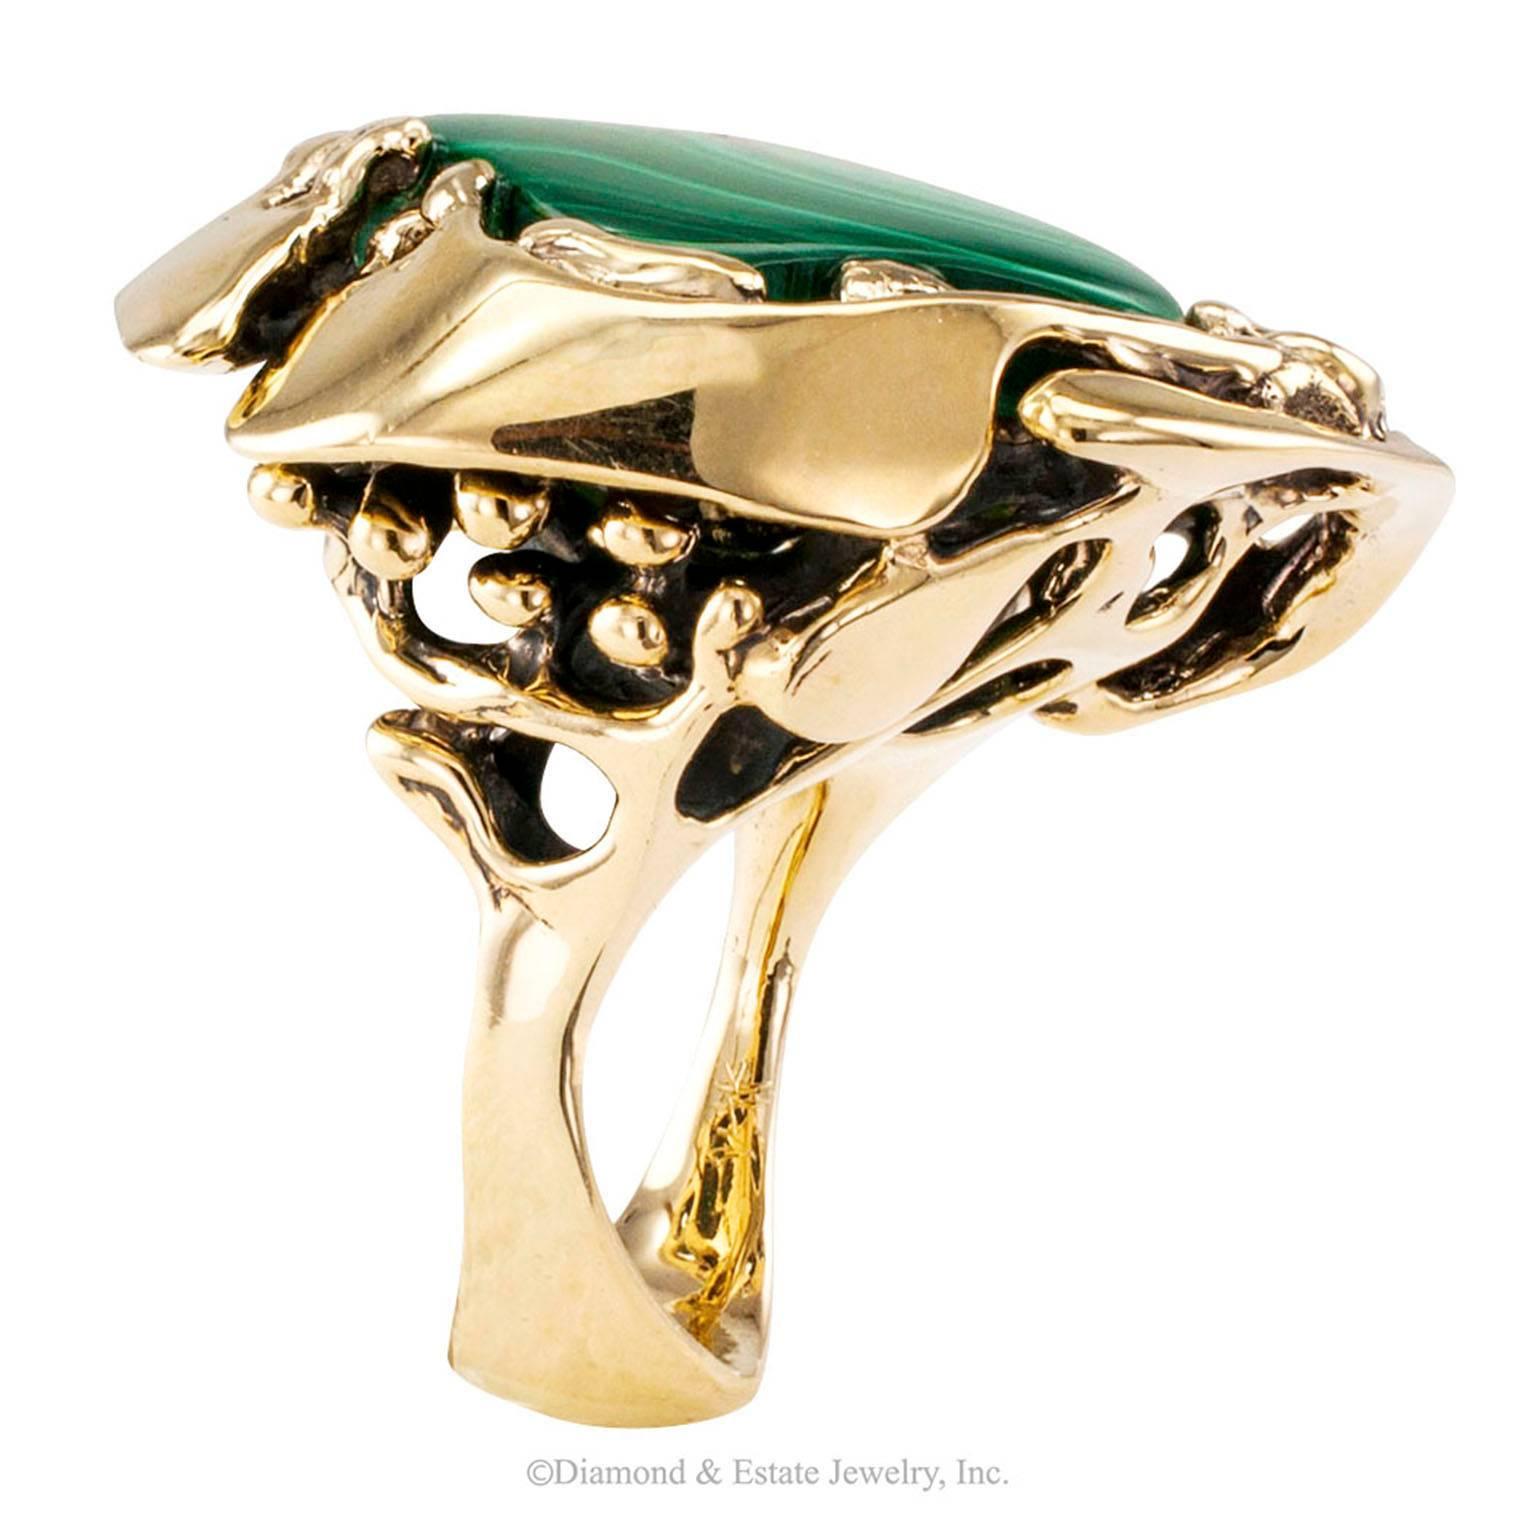 1960s Modernist Malachite Bulls Eye Abstract Gold Ring

1960s Modernist malachite free-form bull's eye set in an abstract gold ring.  The design centers upon a free-form malachite cabochon characterized by a very well defined bull's eye, within a